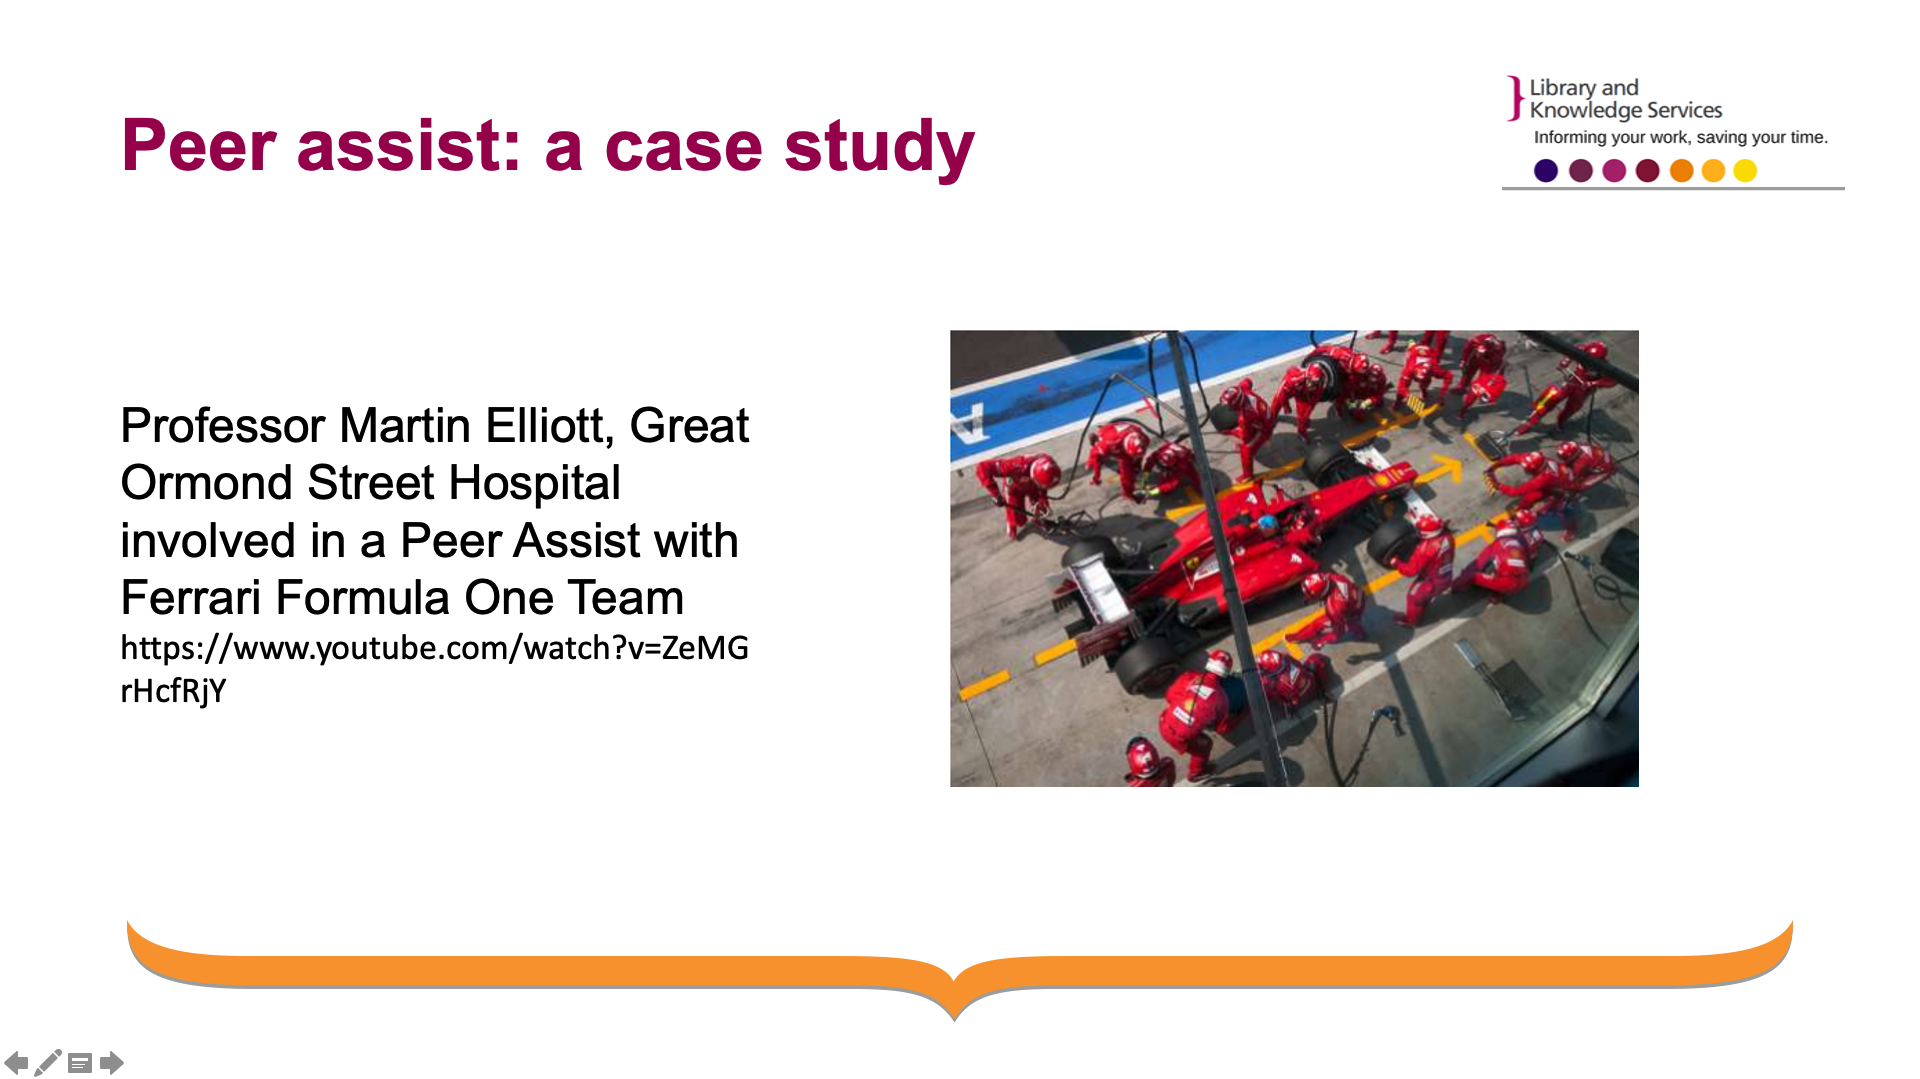 Slide 7: This has an image of a formula 1 racing team changing tires on the car. The caption is a link to the youtube video where Professor Martin Elliot from the Great Ormond Street Hospital explains his involvement in a peer assist where a team of healthcare professionals completed a peer assist with a formula 1 team.